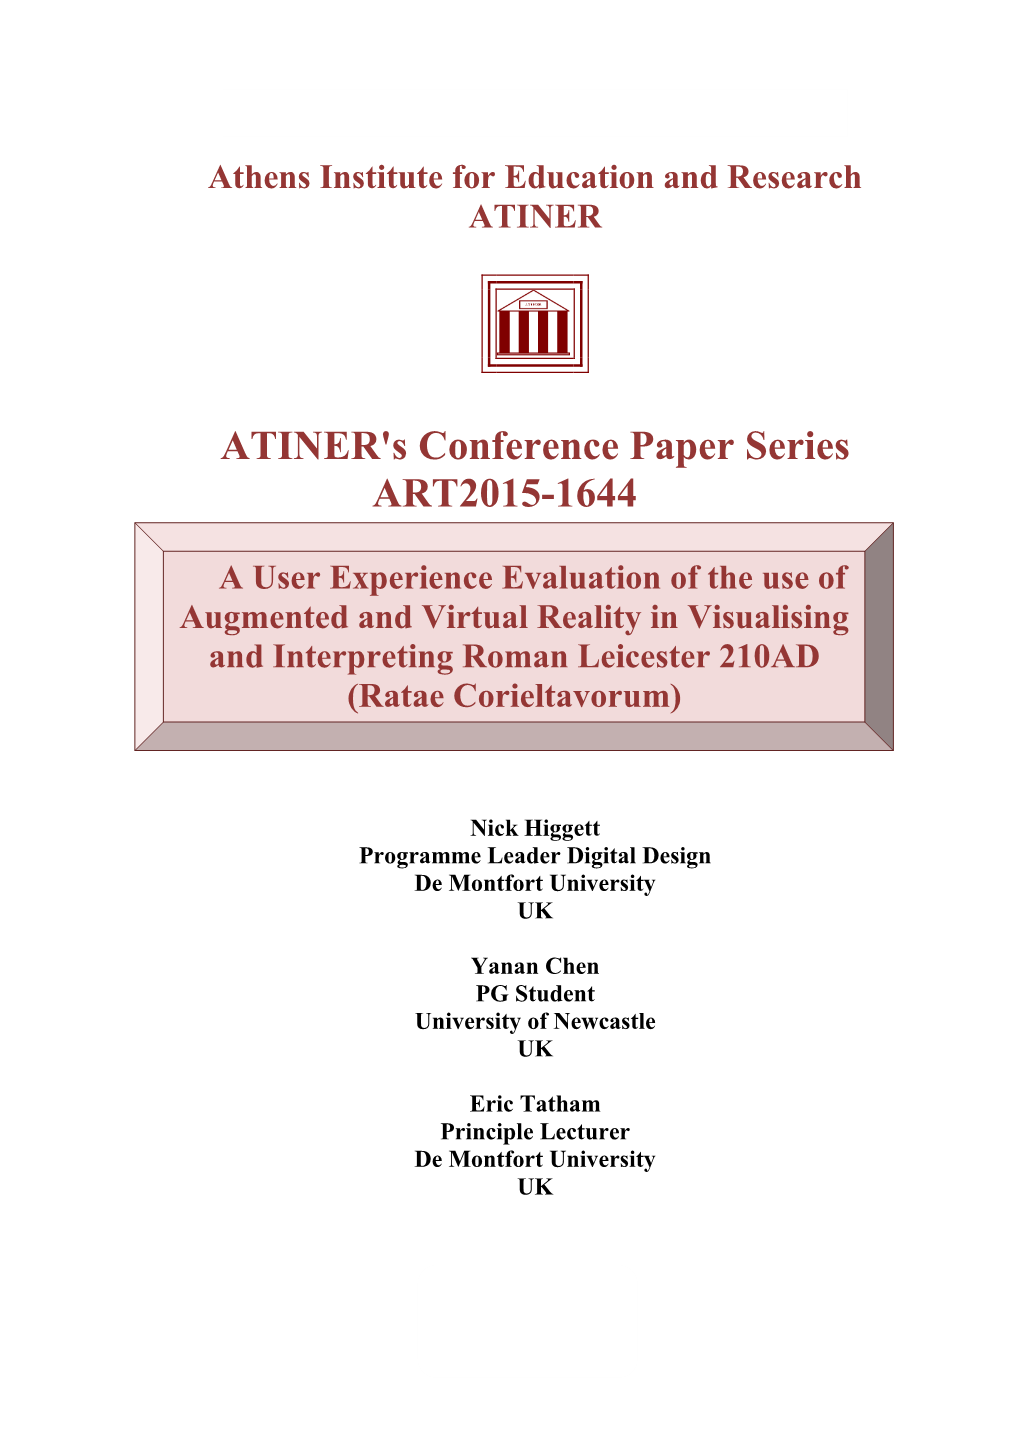 ATINER's Conference Paper Series ART2015-1644